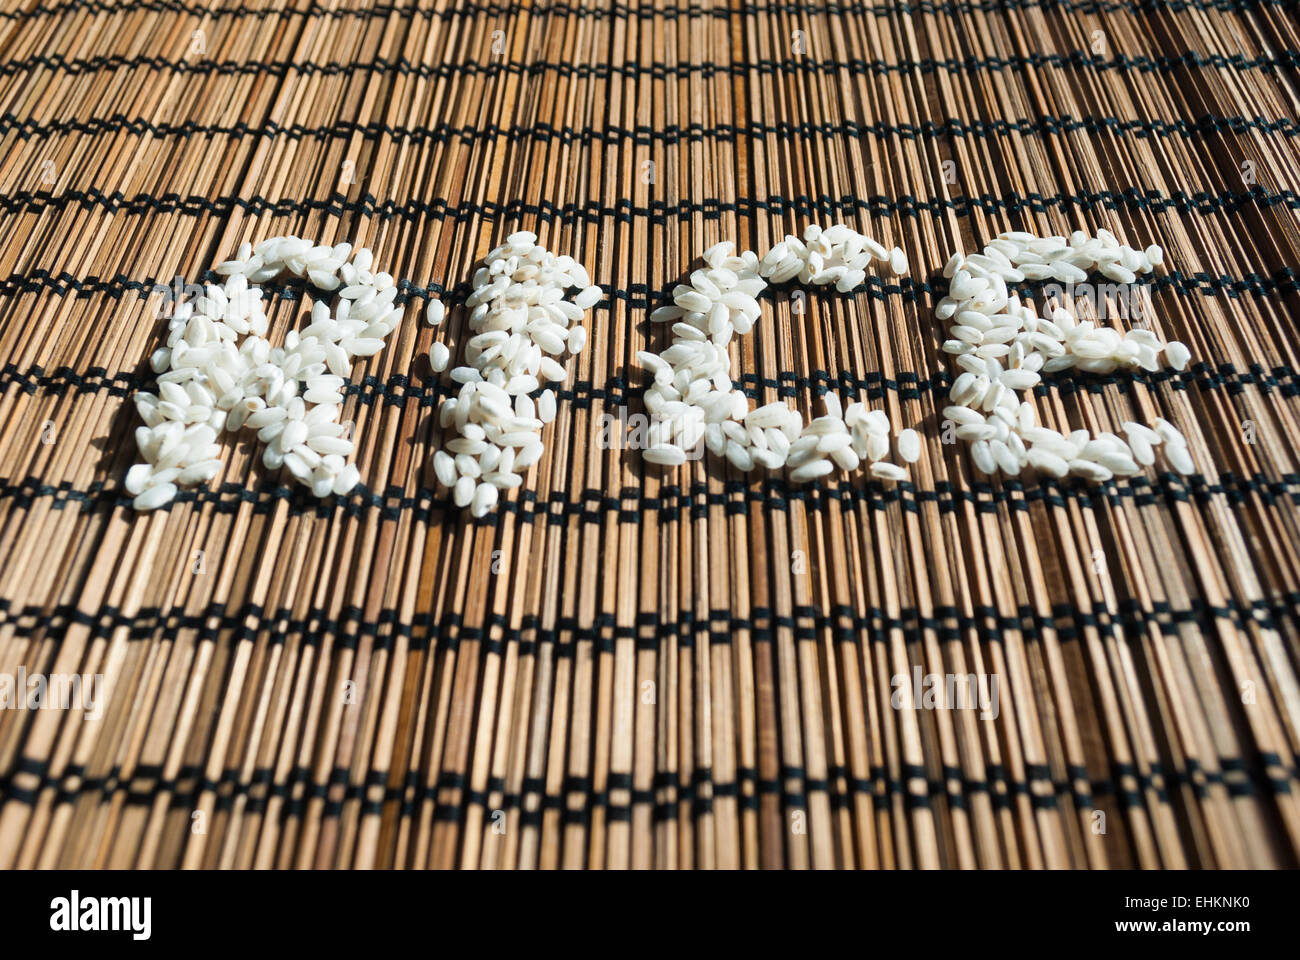 Sign 'rice' on a wicker placemat, written with rice grains Stock Photo